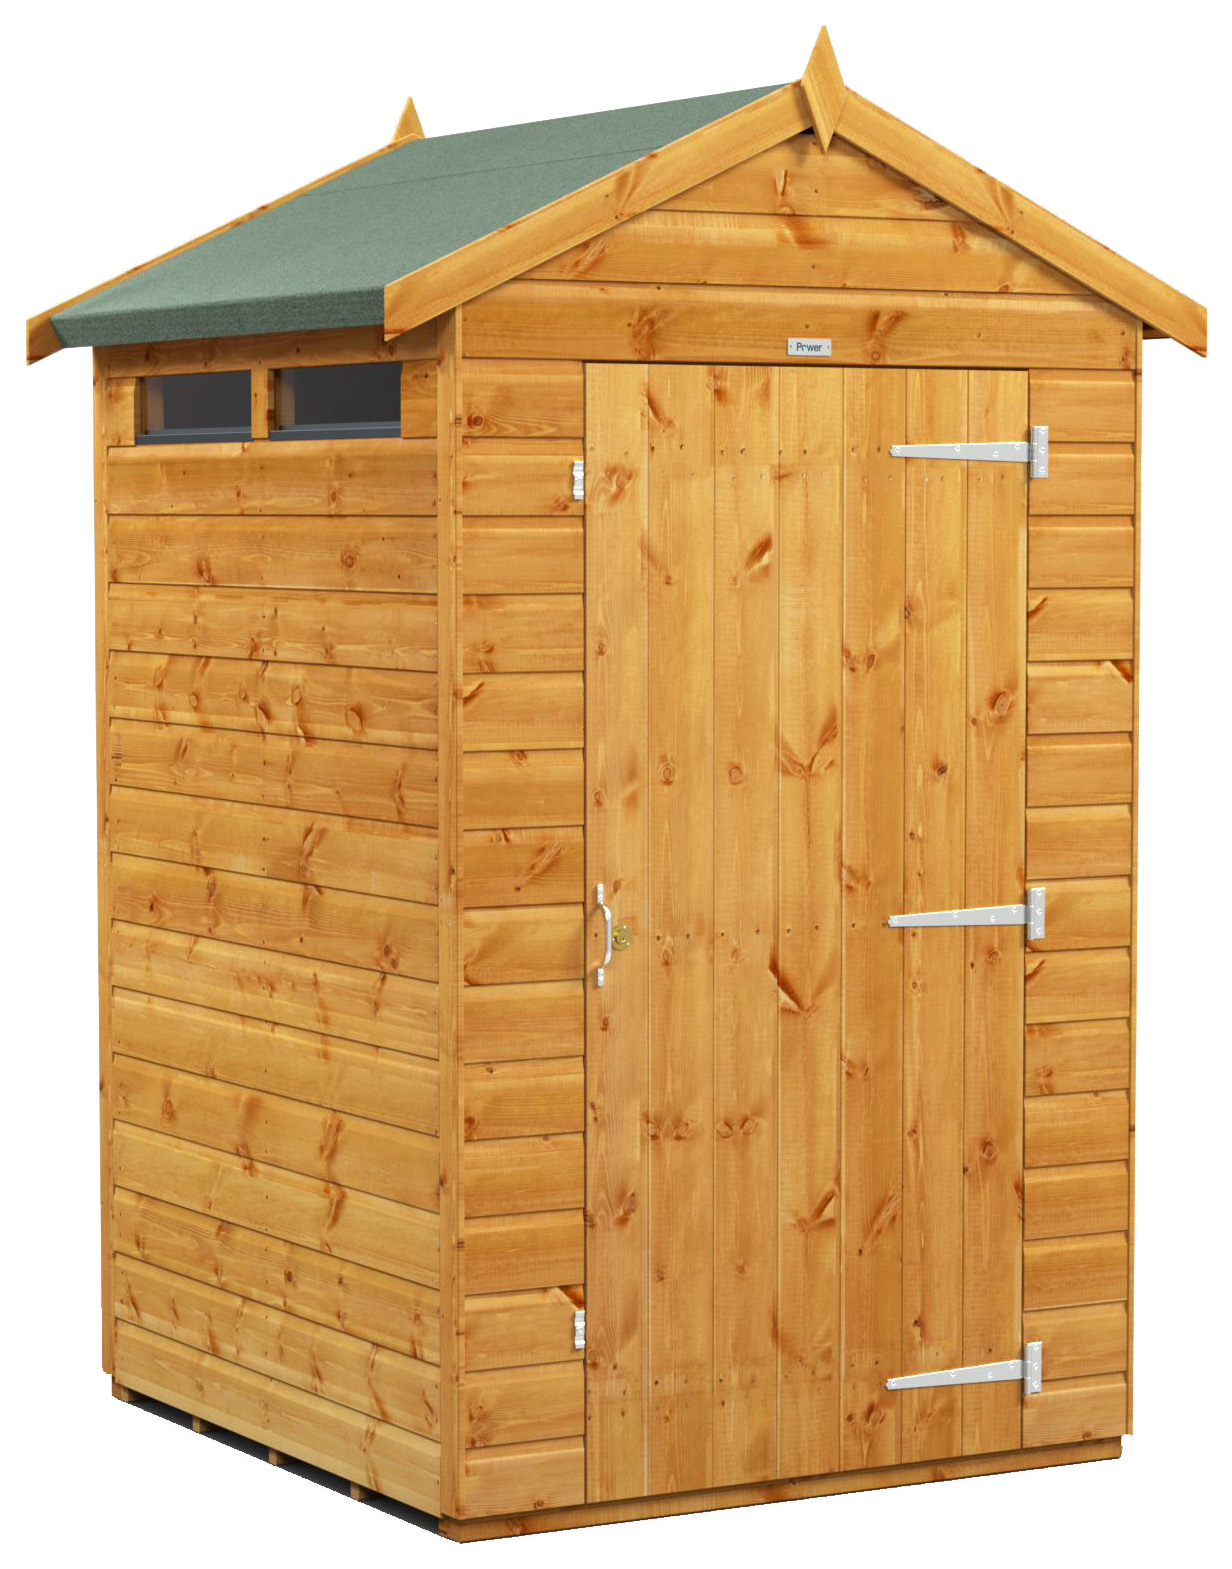 Power Sheds 4 x 4ft Apex Shiplap Dip Treated Security Shed